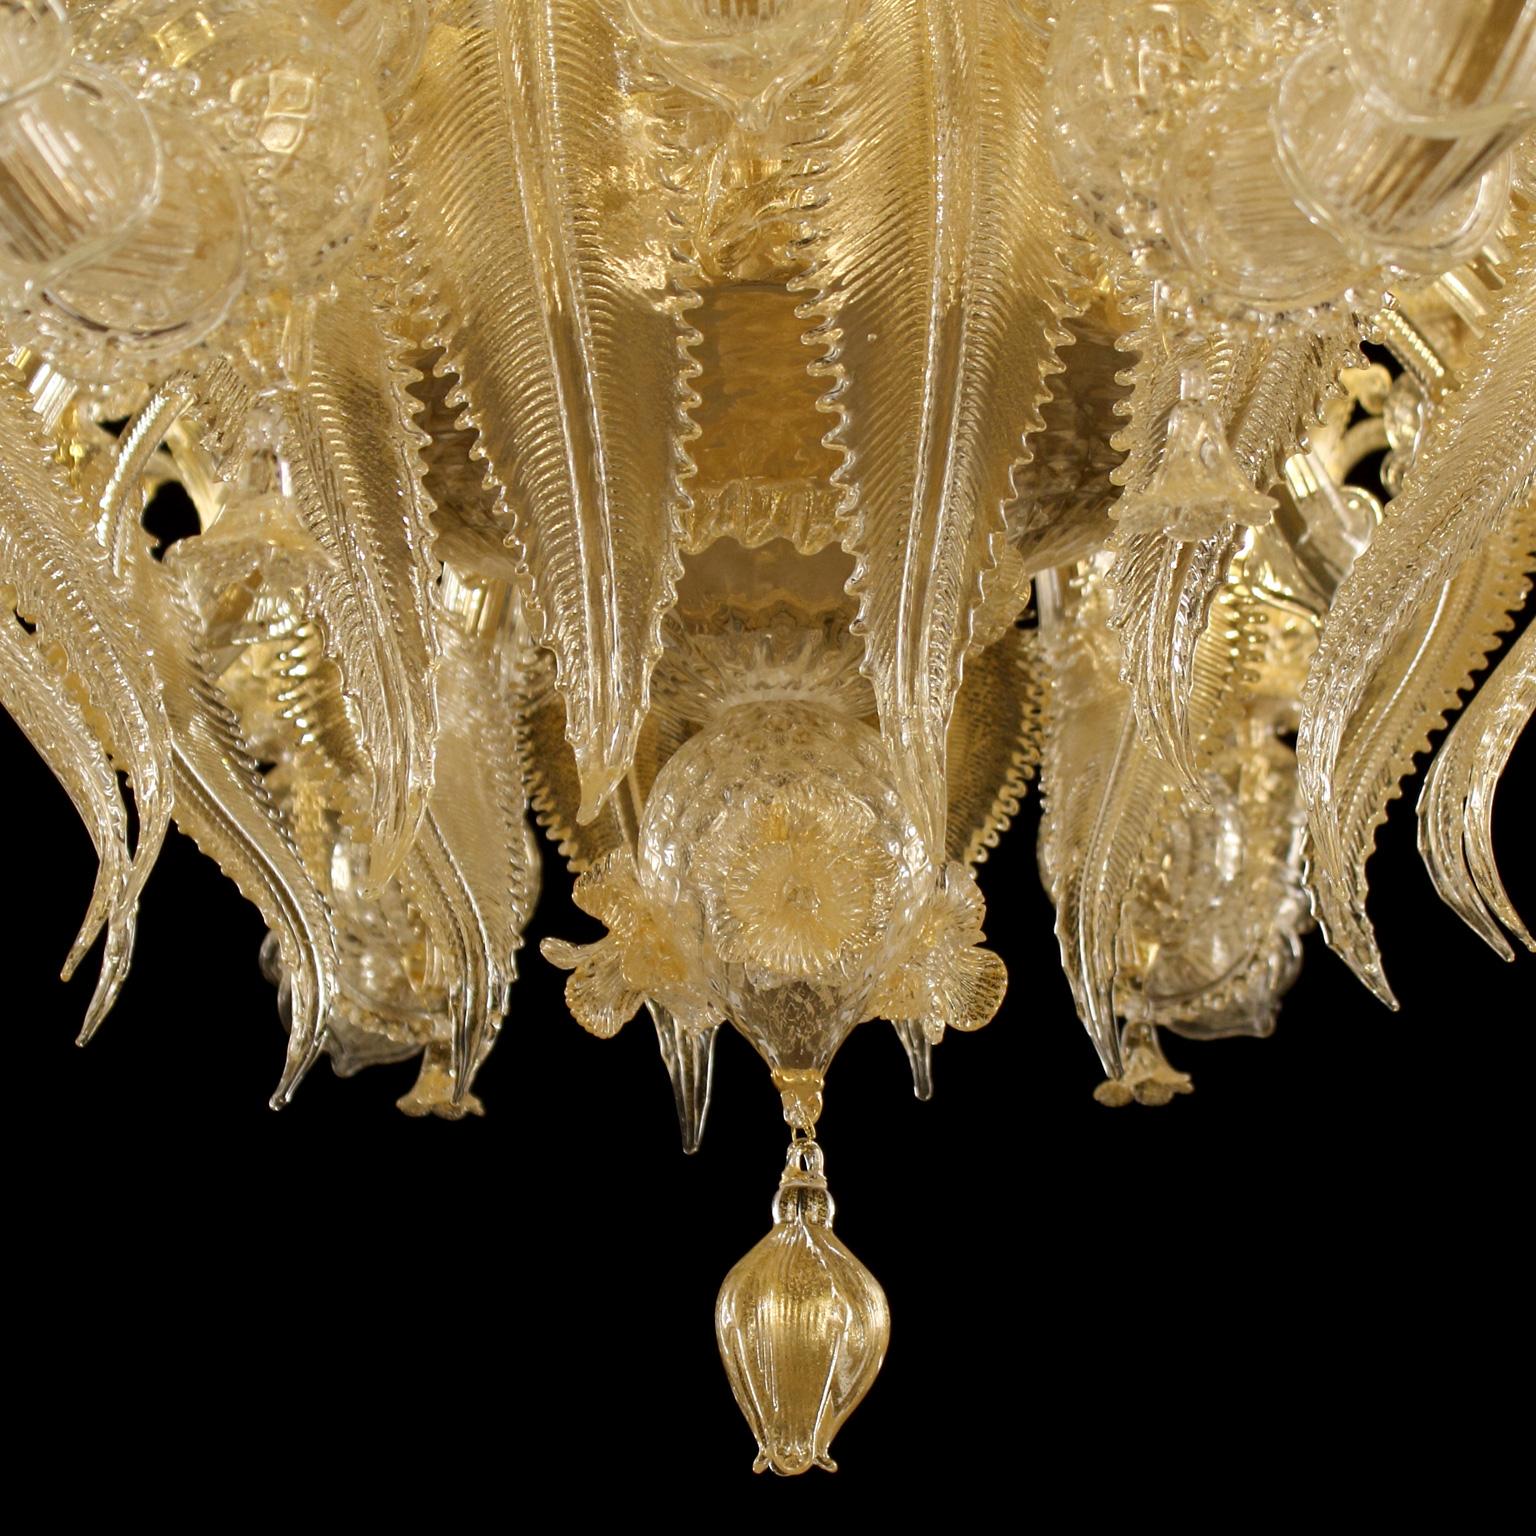 Contemporary Luxury Artistic Rezzonico Chandelier 8+8 Arms Gold Murano glass by Multiforme For Sale